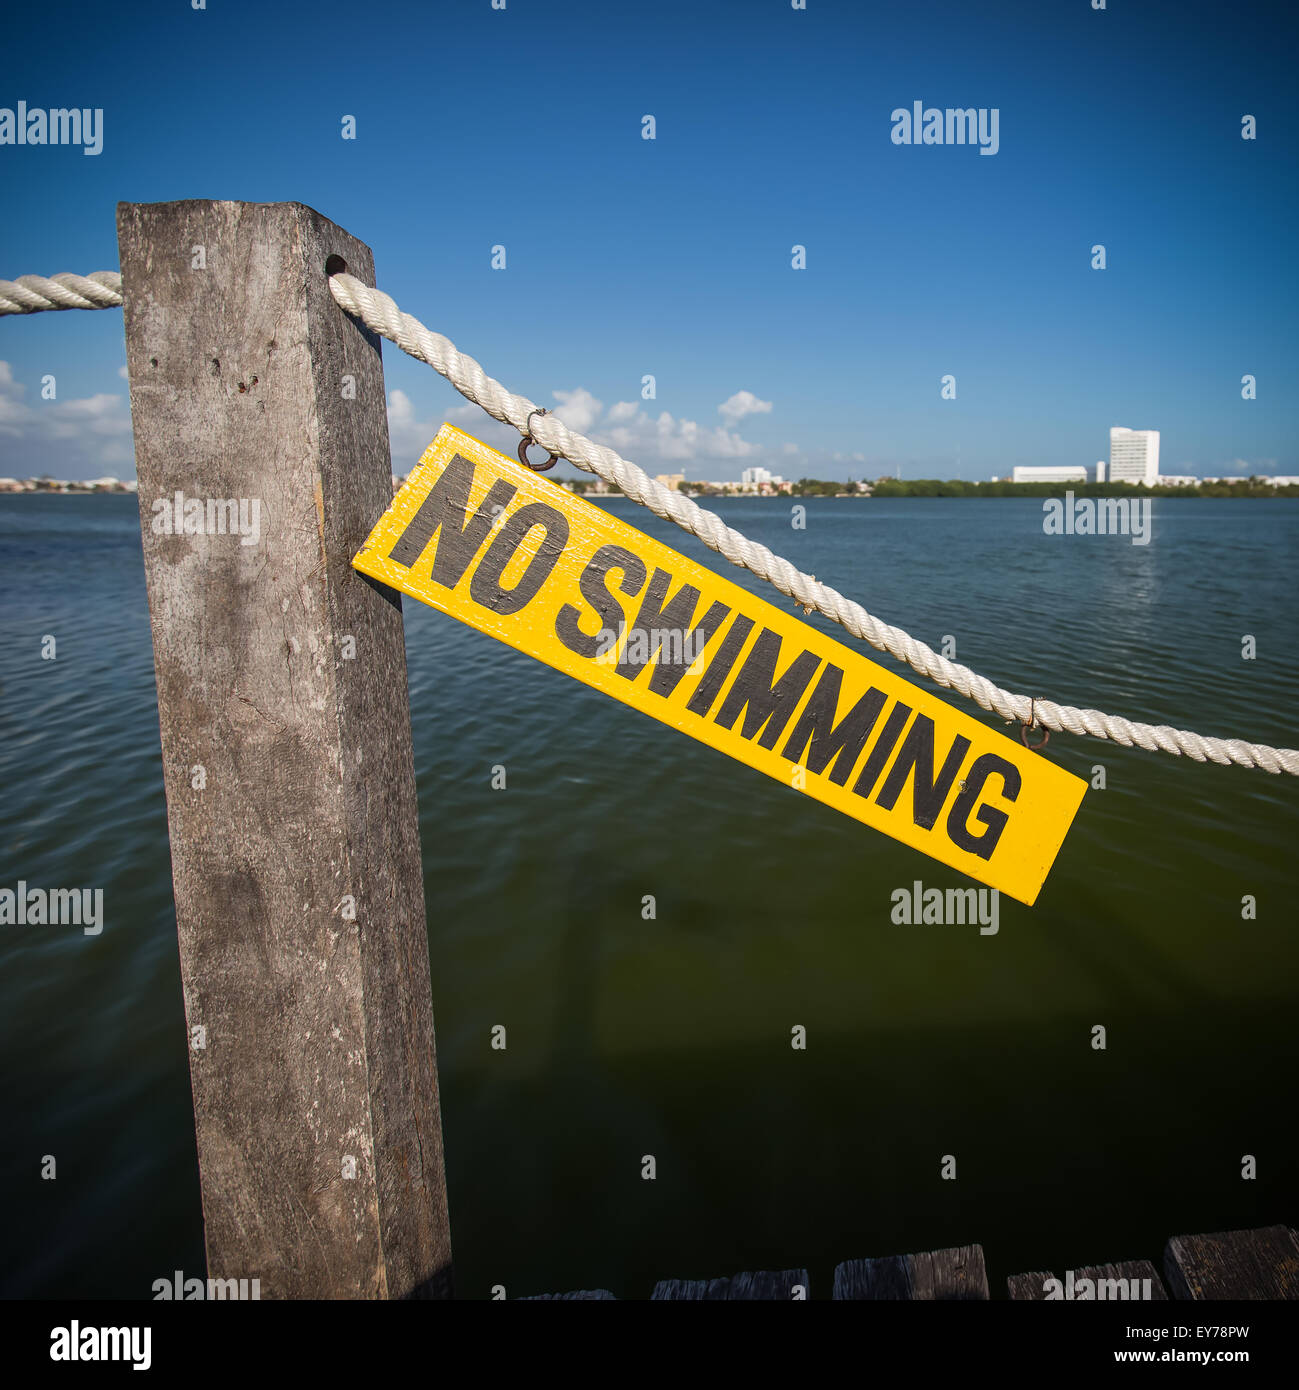 No swimming sign on wooden tablet near lagoon Stock Photo